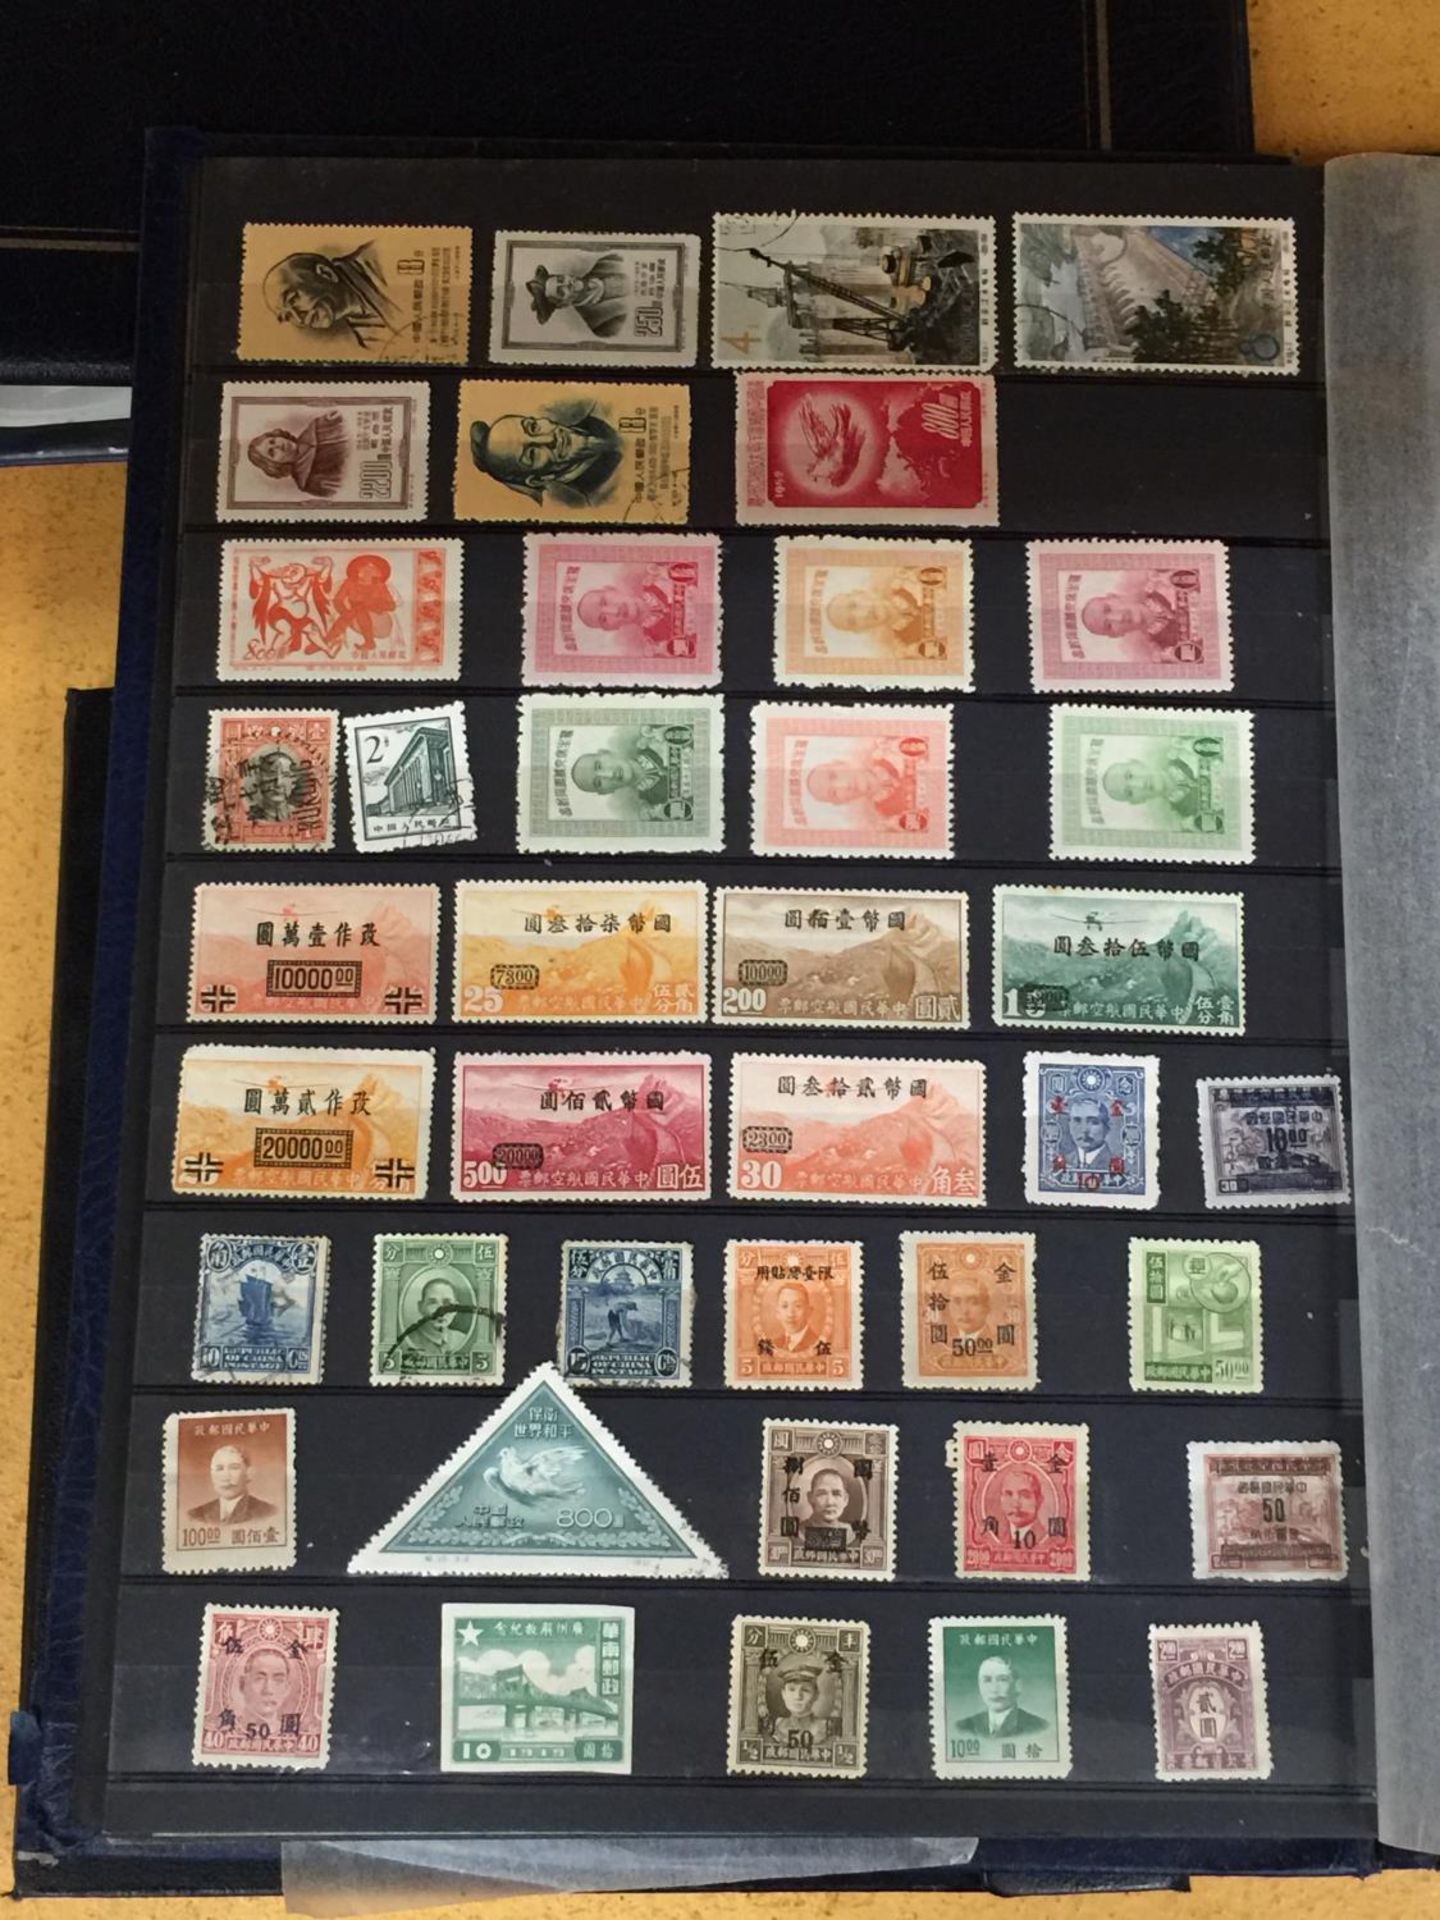 AN ALBUM CONTAINING RARE AND COLLECTABLE MOSTLY ASIAN STAMPS - Image 6 of 7